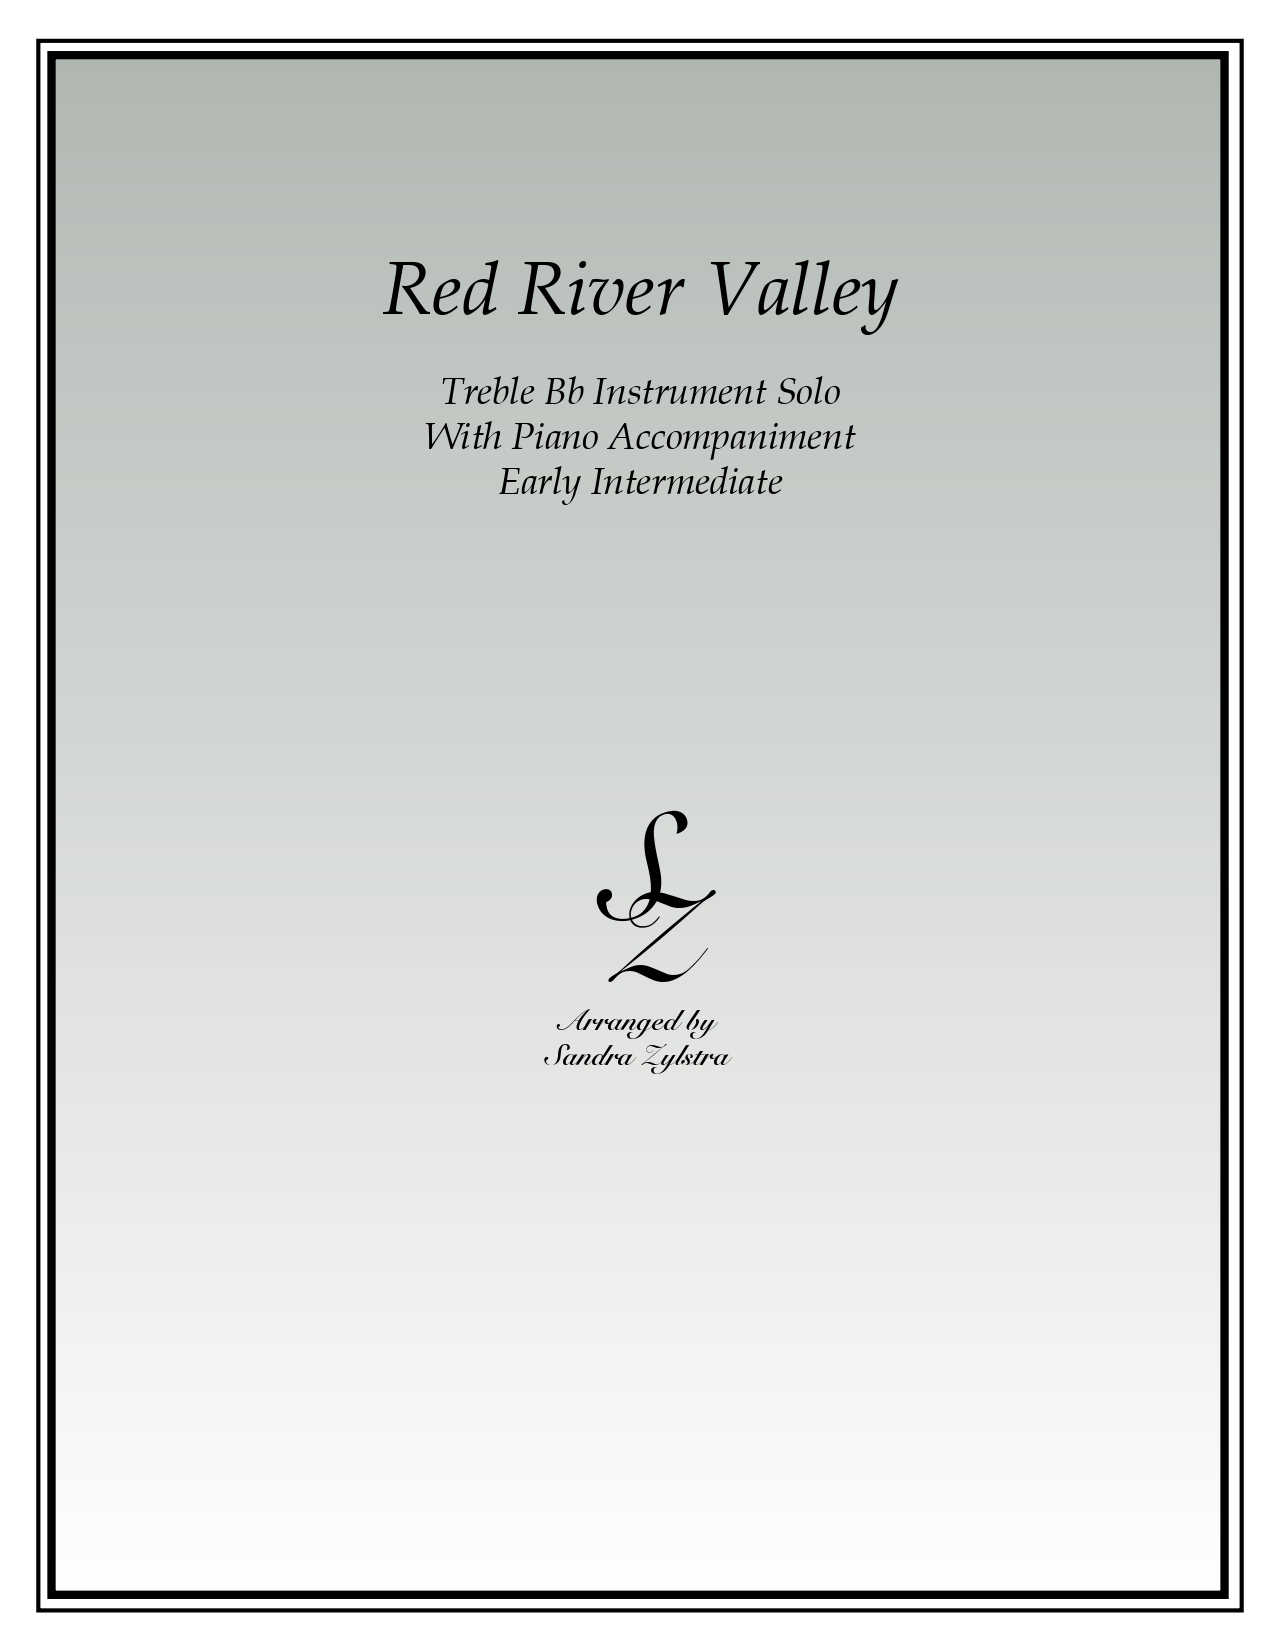 Red River Valley Bb instrument solo part cover page 00011